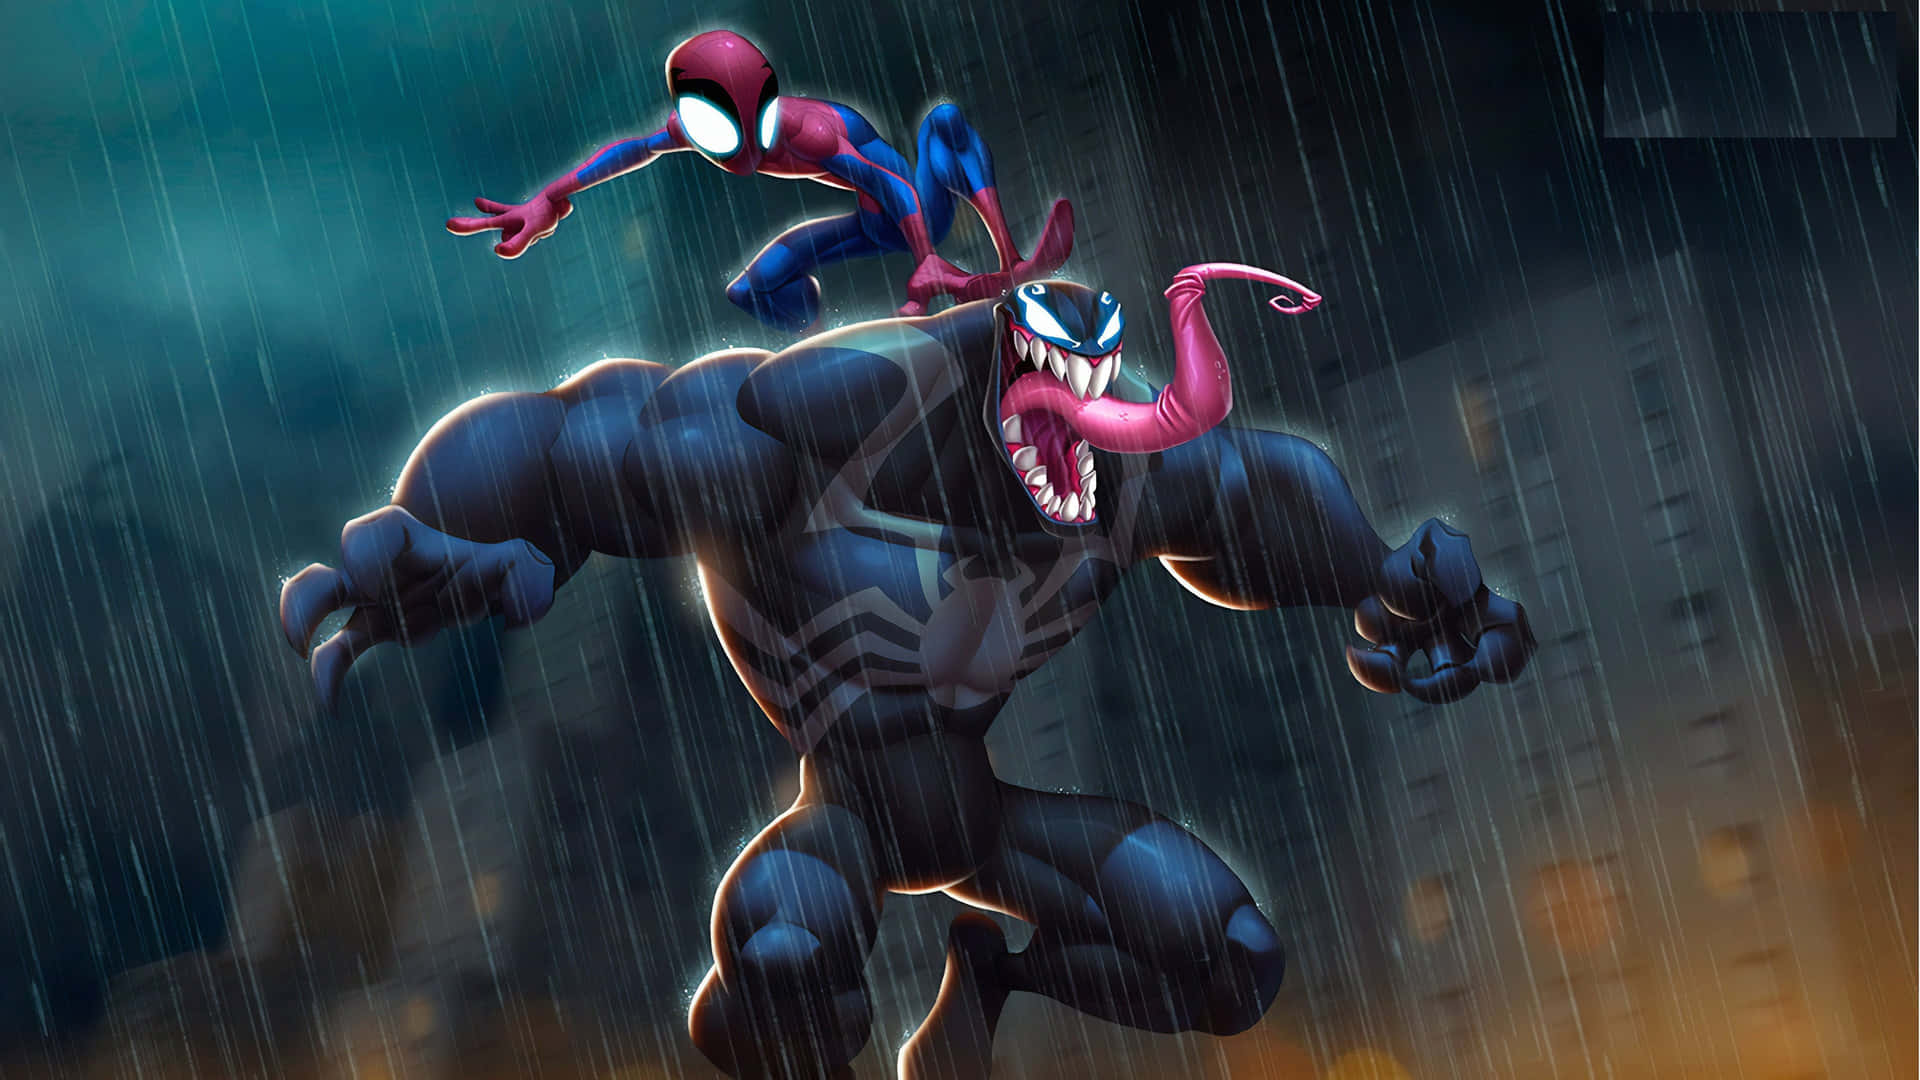 "Venom Unleashed - The Fierce Anti-hero From the Marvel Universe" Wallpaper